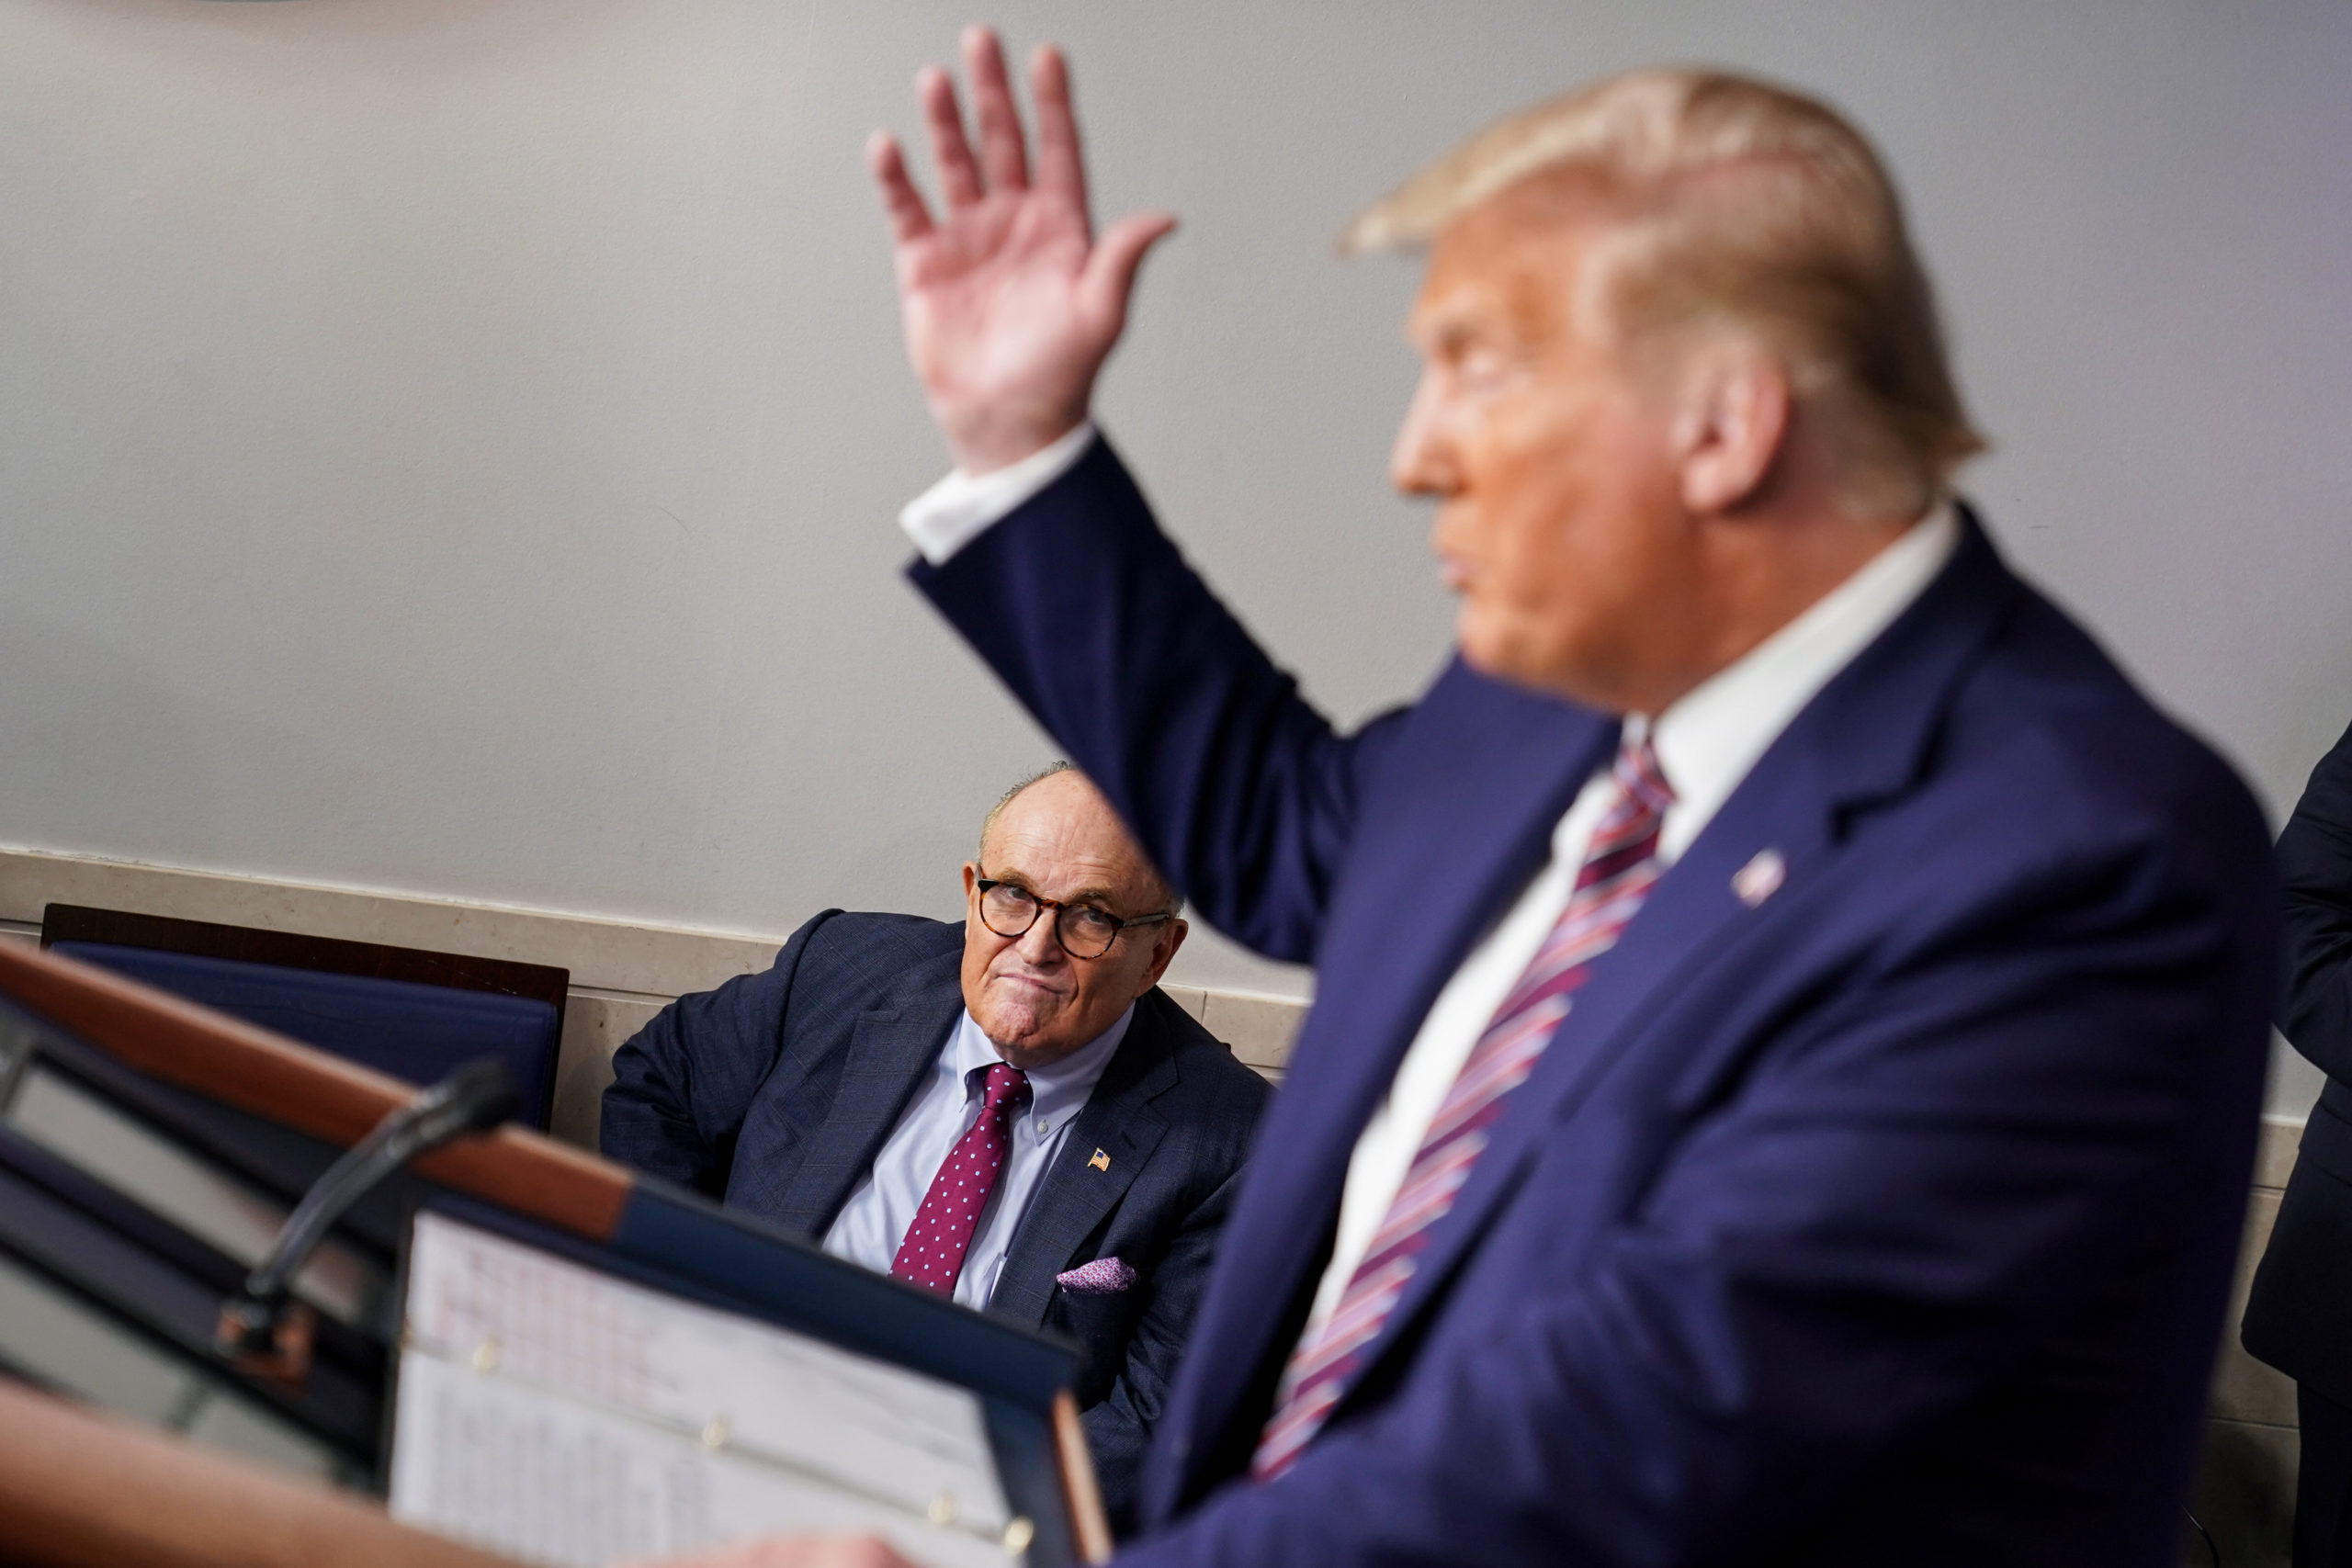 WASHINGTON, DC - SEPTEMBER 27: Former New York Mayor Rudy Giuliani listens as U.S. President Donald Trump speaks during a news conference in the Briefing Room of the White House on September 27, 2020 in Washington, DC. Trump is preparing for the first presidential debate with former Vice President and Democratic Nominee Joe Biden on September 29th in Cleveland, Ohio. (Photo by Joshua Roberts/Getty Images)